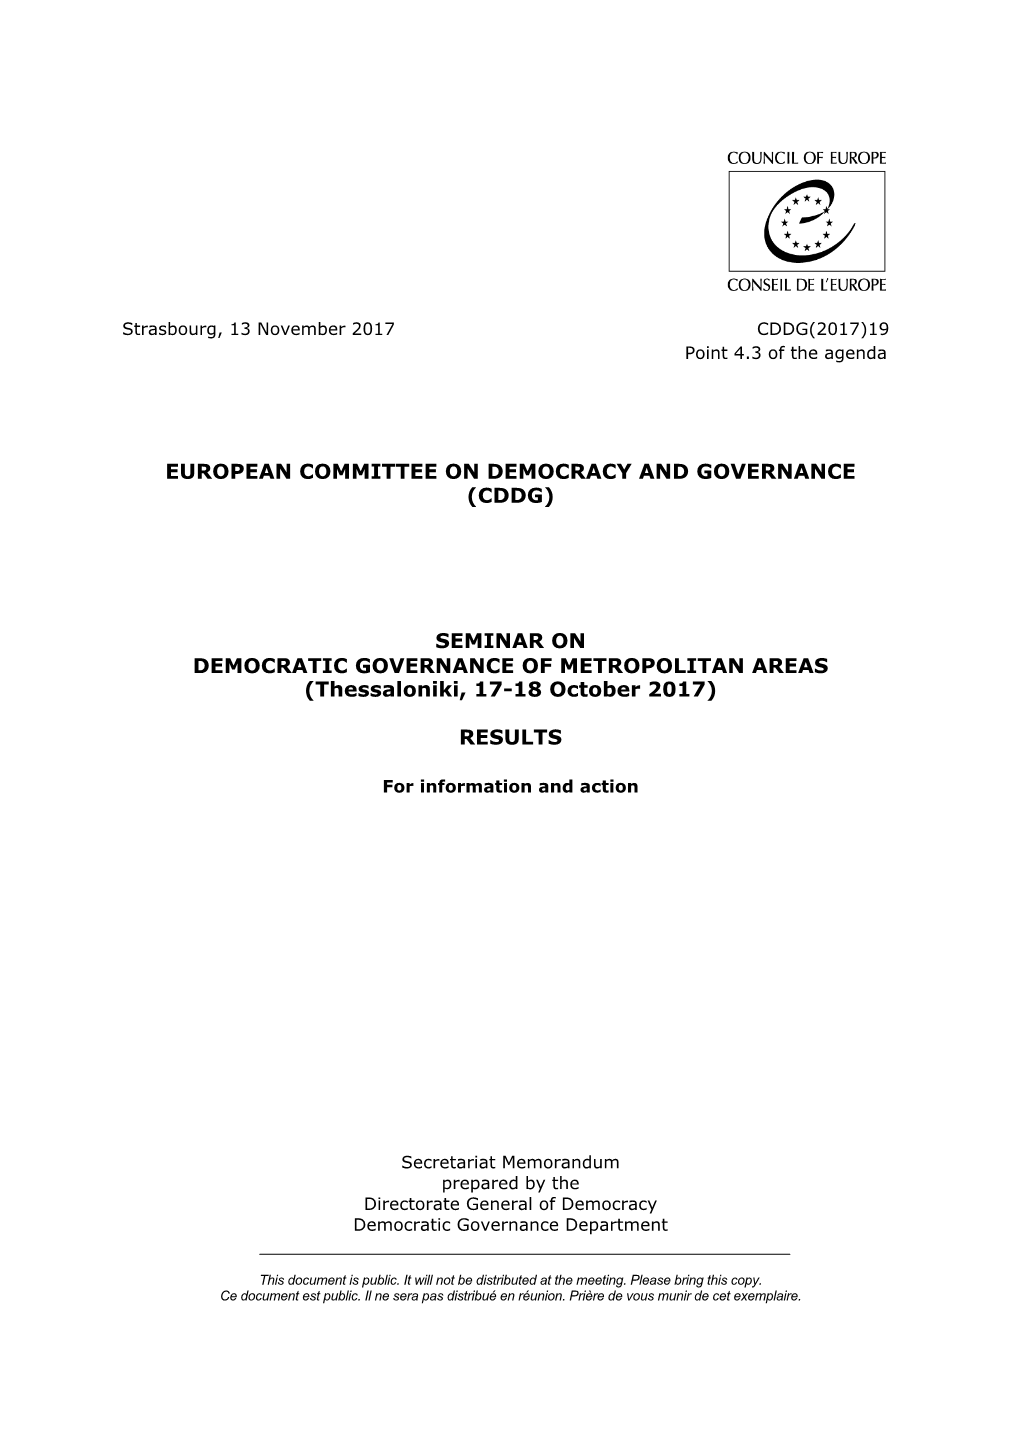 European Committee on Democracy and Governance (Cddg)